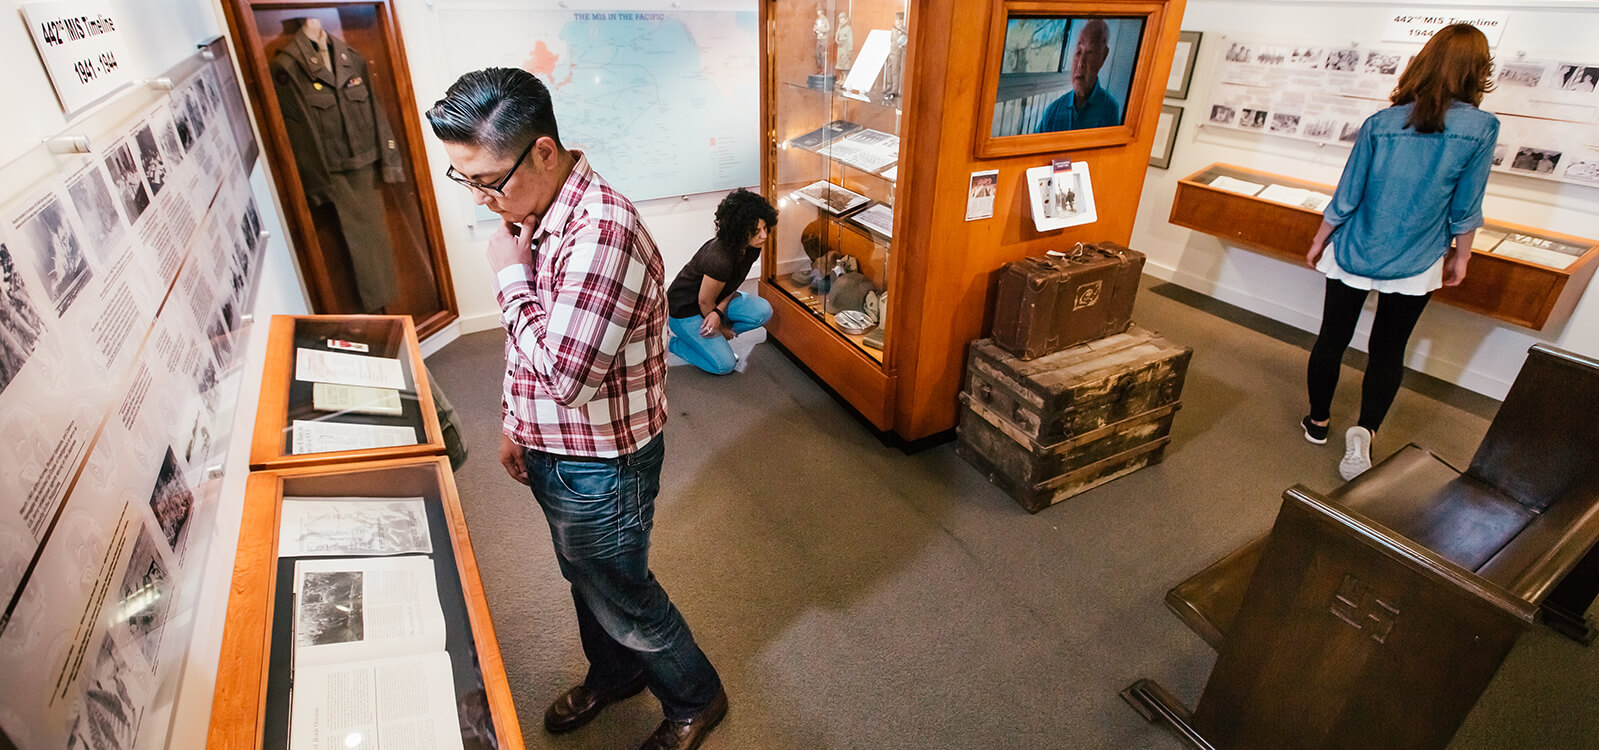 People viewing artifacts on exhibit at the Japanese American Museum in Japantown